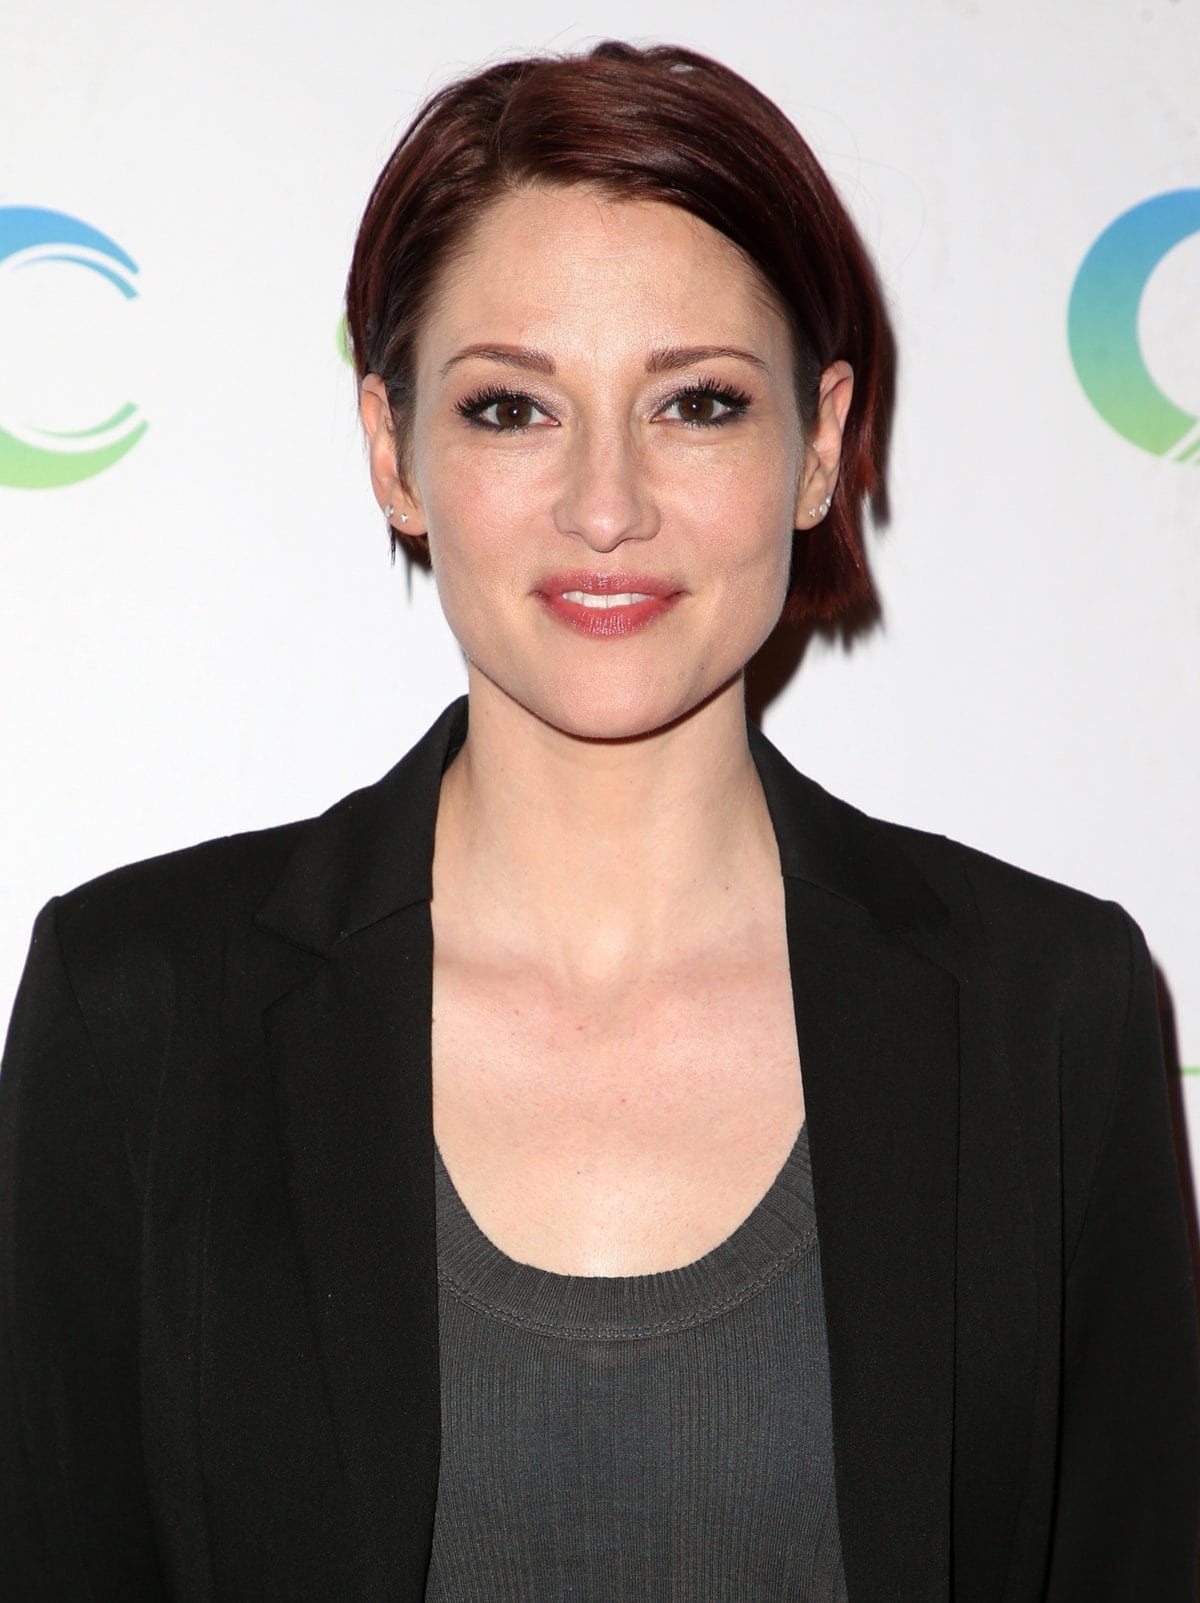 Christian actress Chyler Leigh says her faith helped her stop using drugs